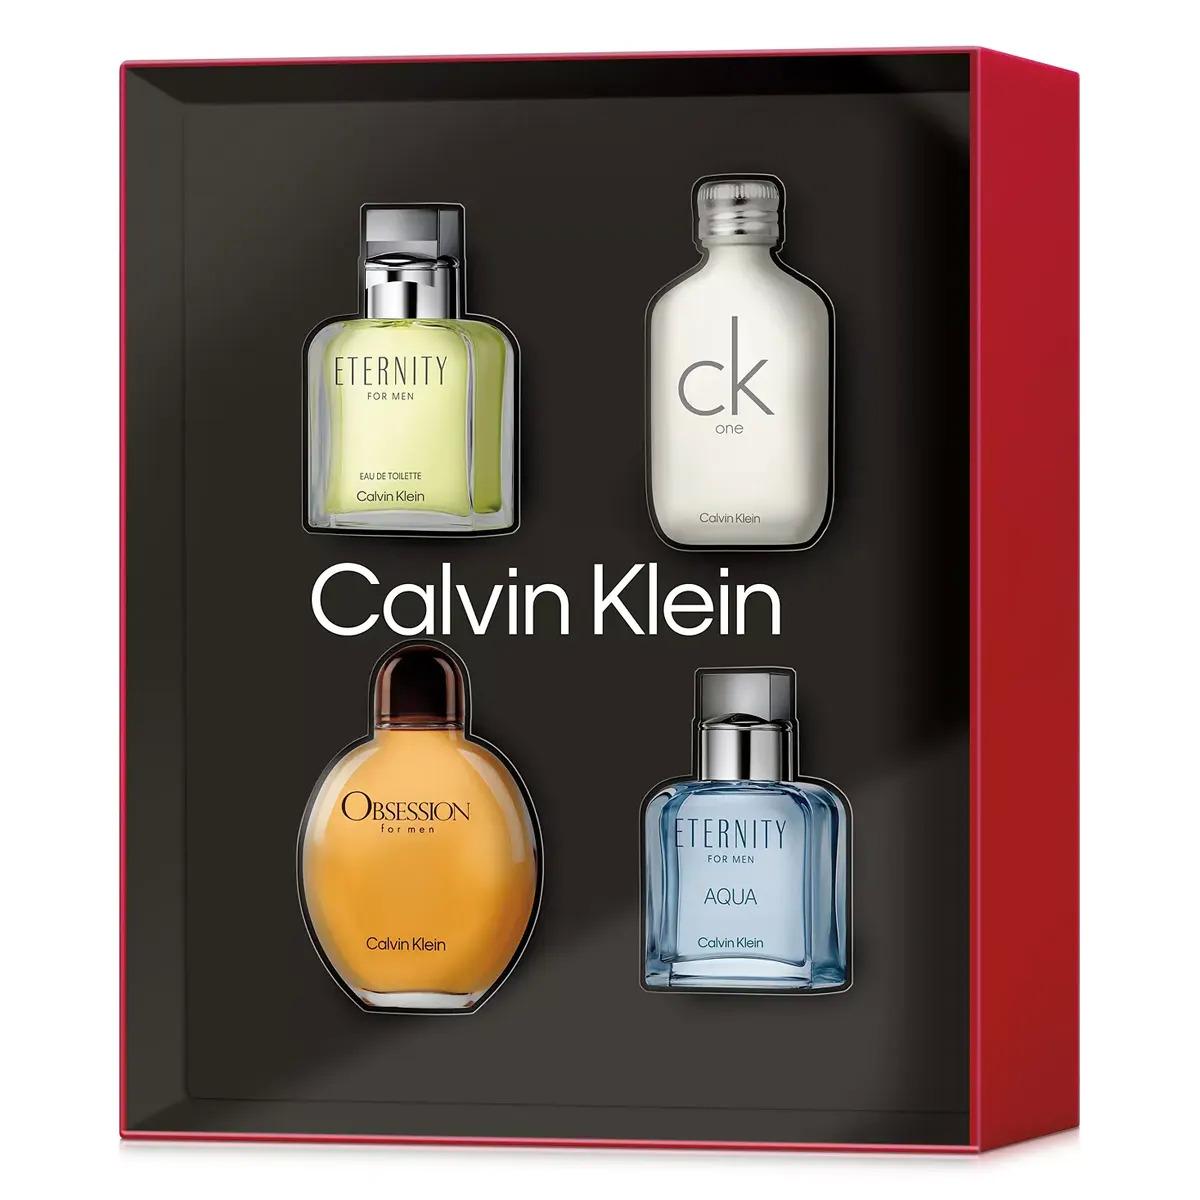 Calvin Klein Mens Cologne 4-Piece Gift Set for $25 Shipped